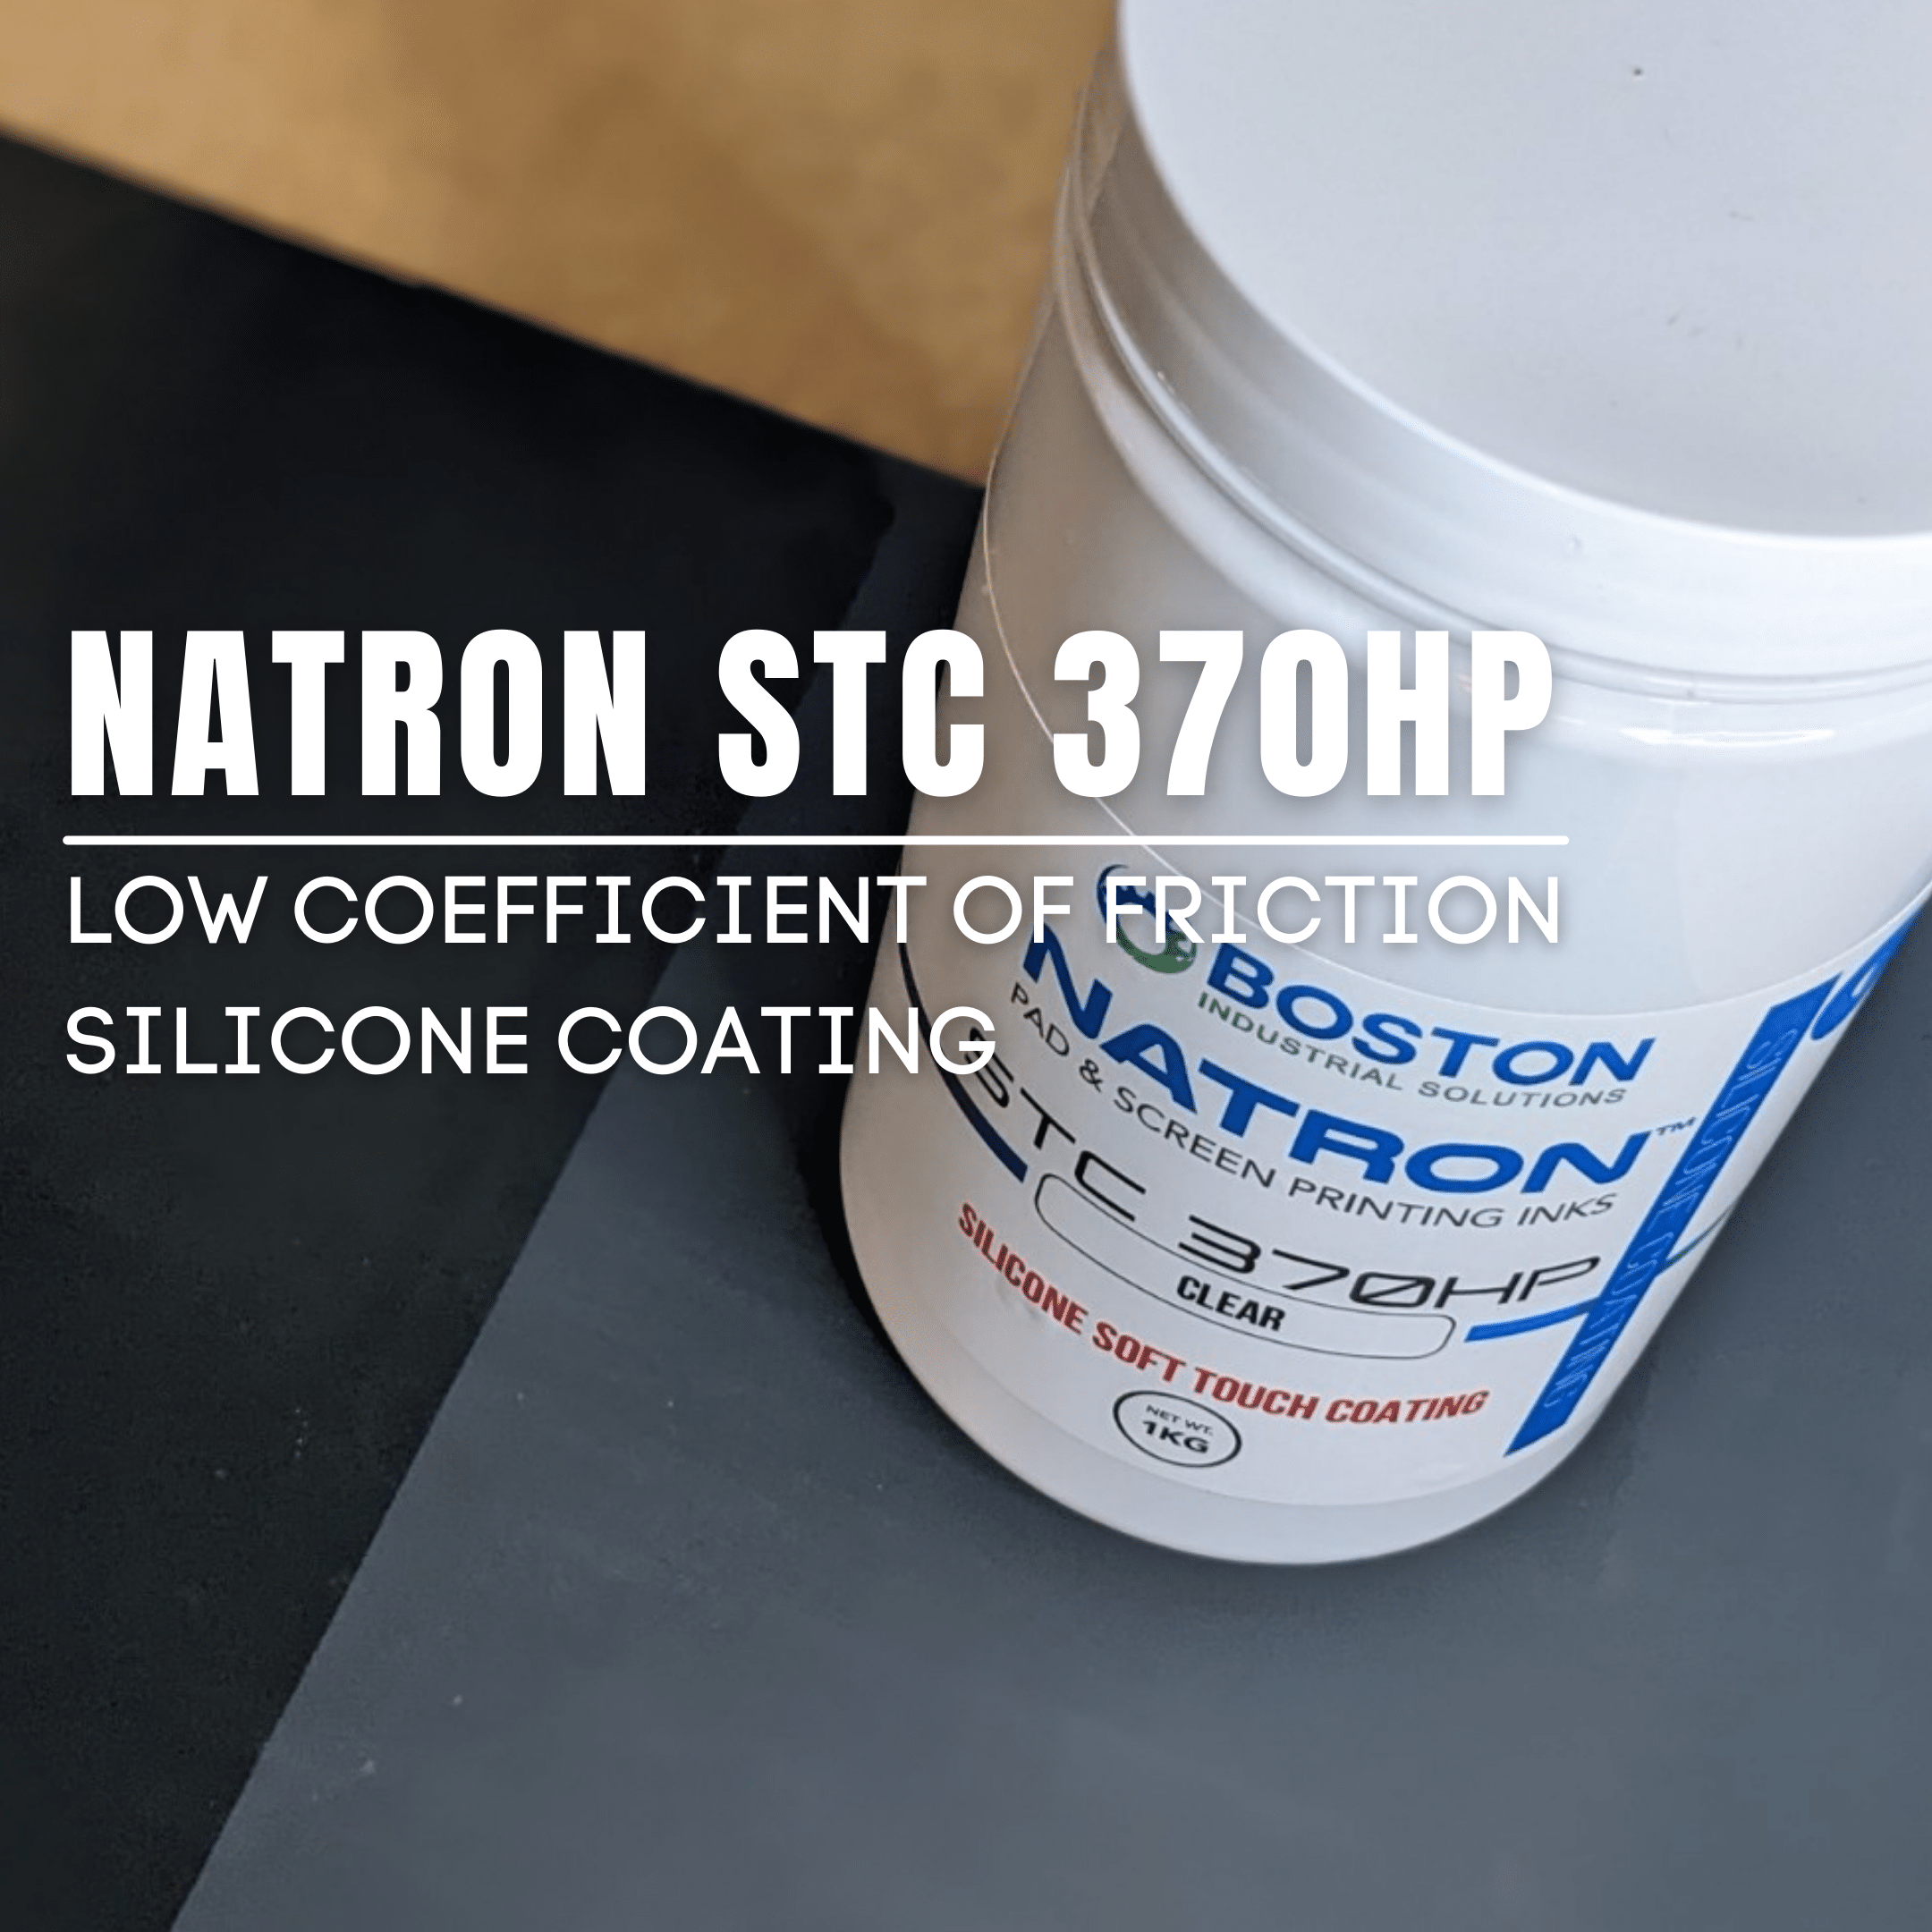 STC 370HP Silicone coating